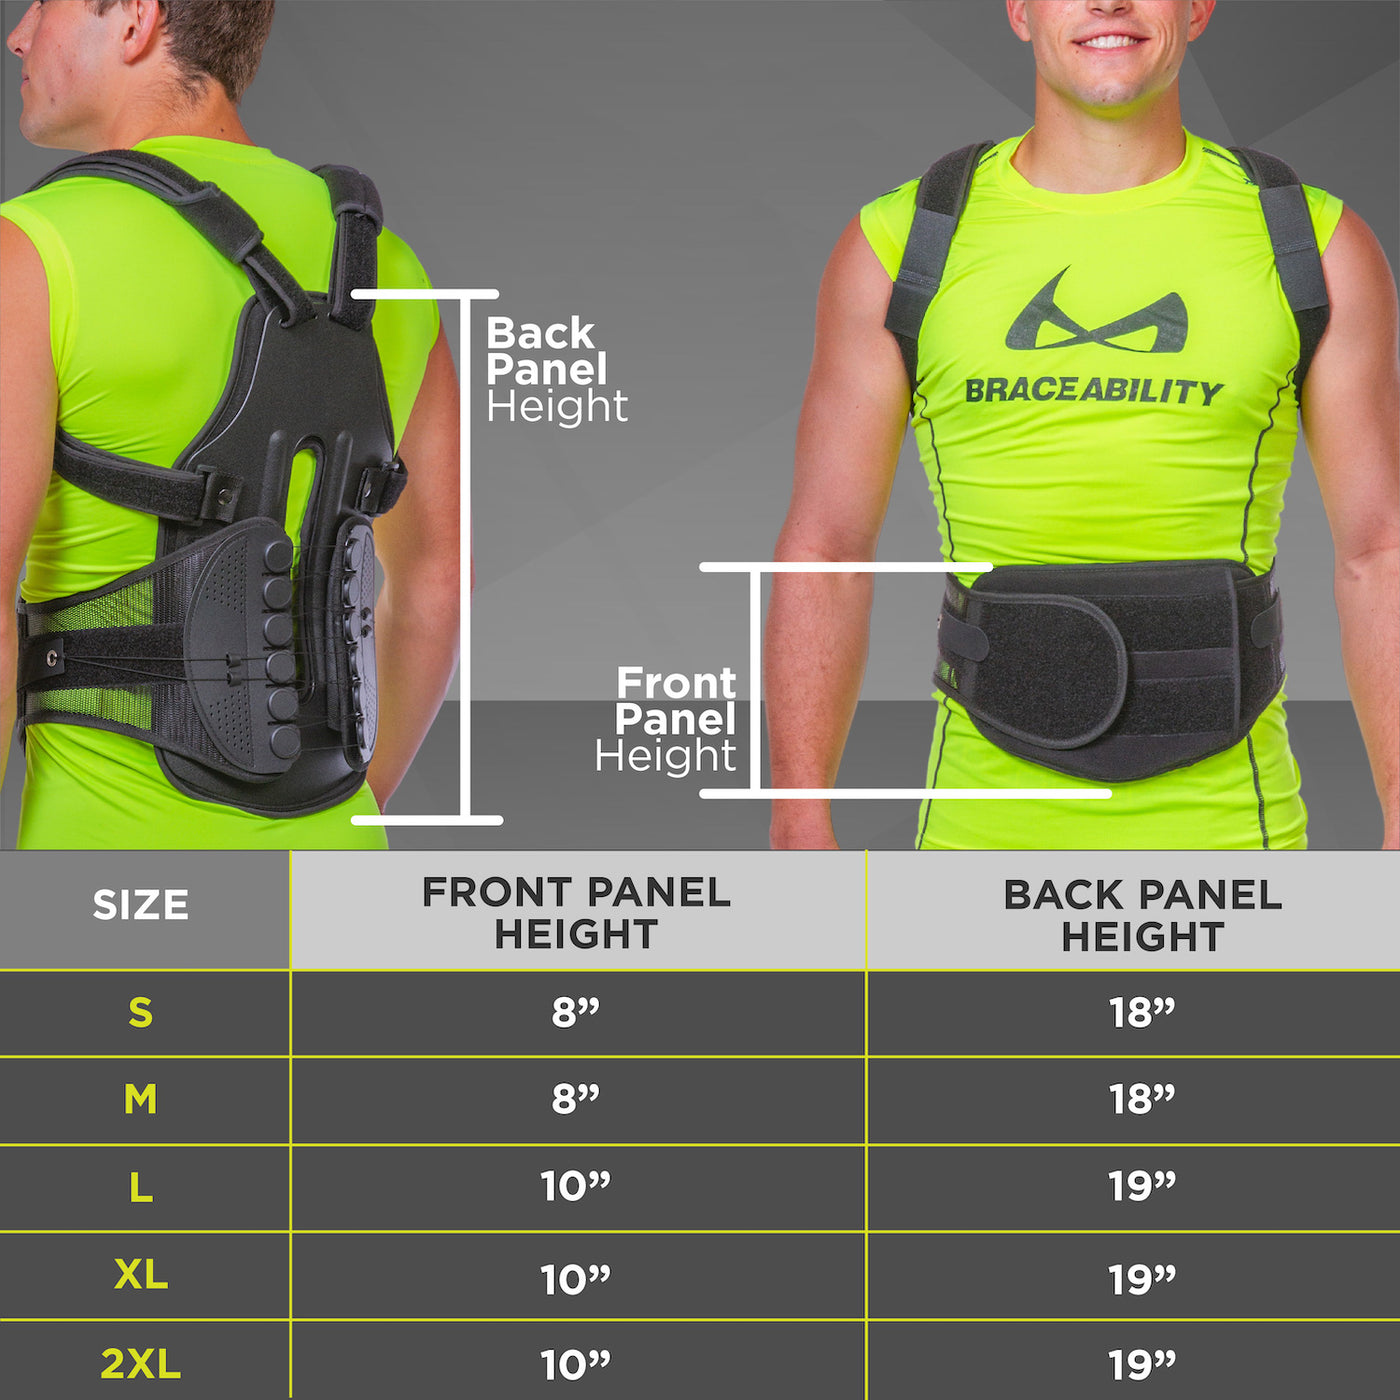 A 21 inch back panel and 7 inch front panel make the scoliosis back brace a comprehensive full back support